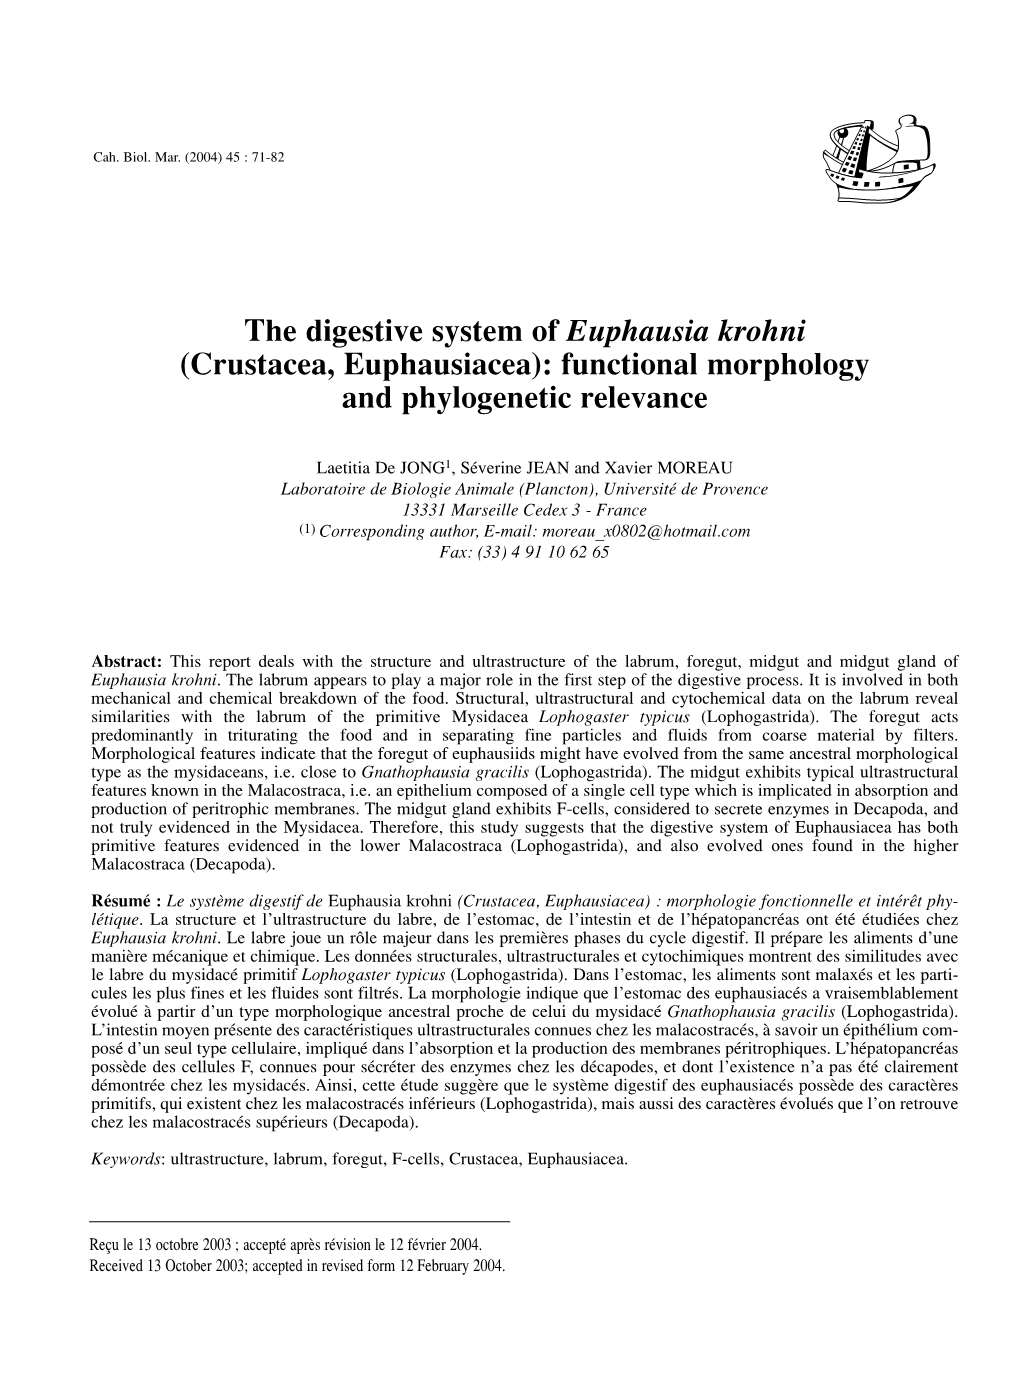 The Digestive System of Euphausia Krohni (Crustacea, Euphausiacea): Functional Morphology and Phylogenetic Relevance